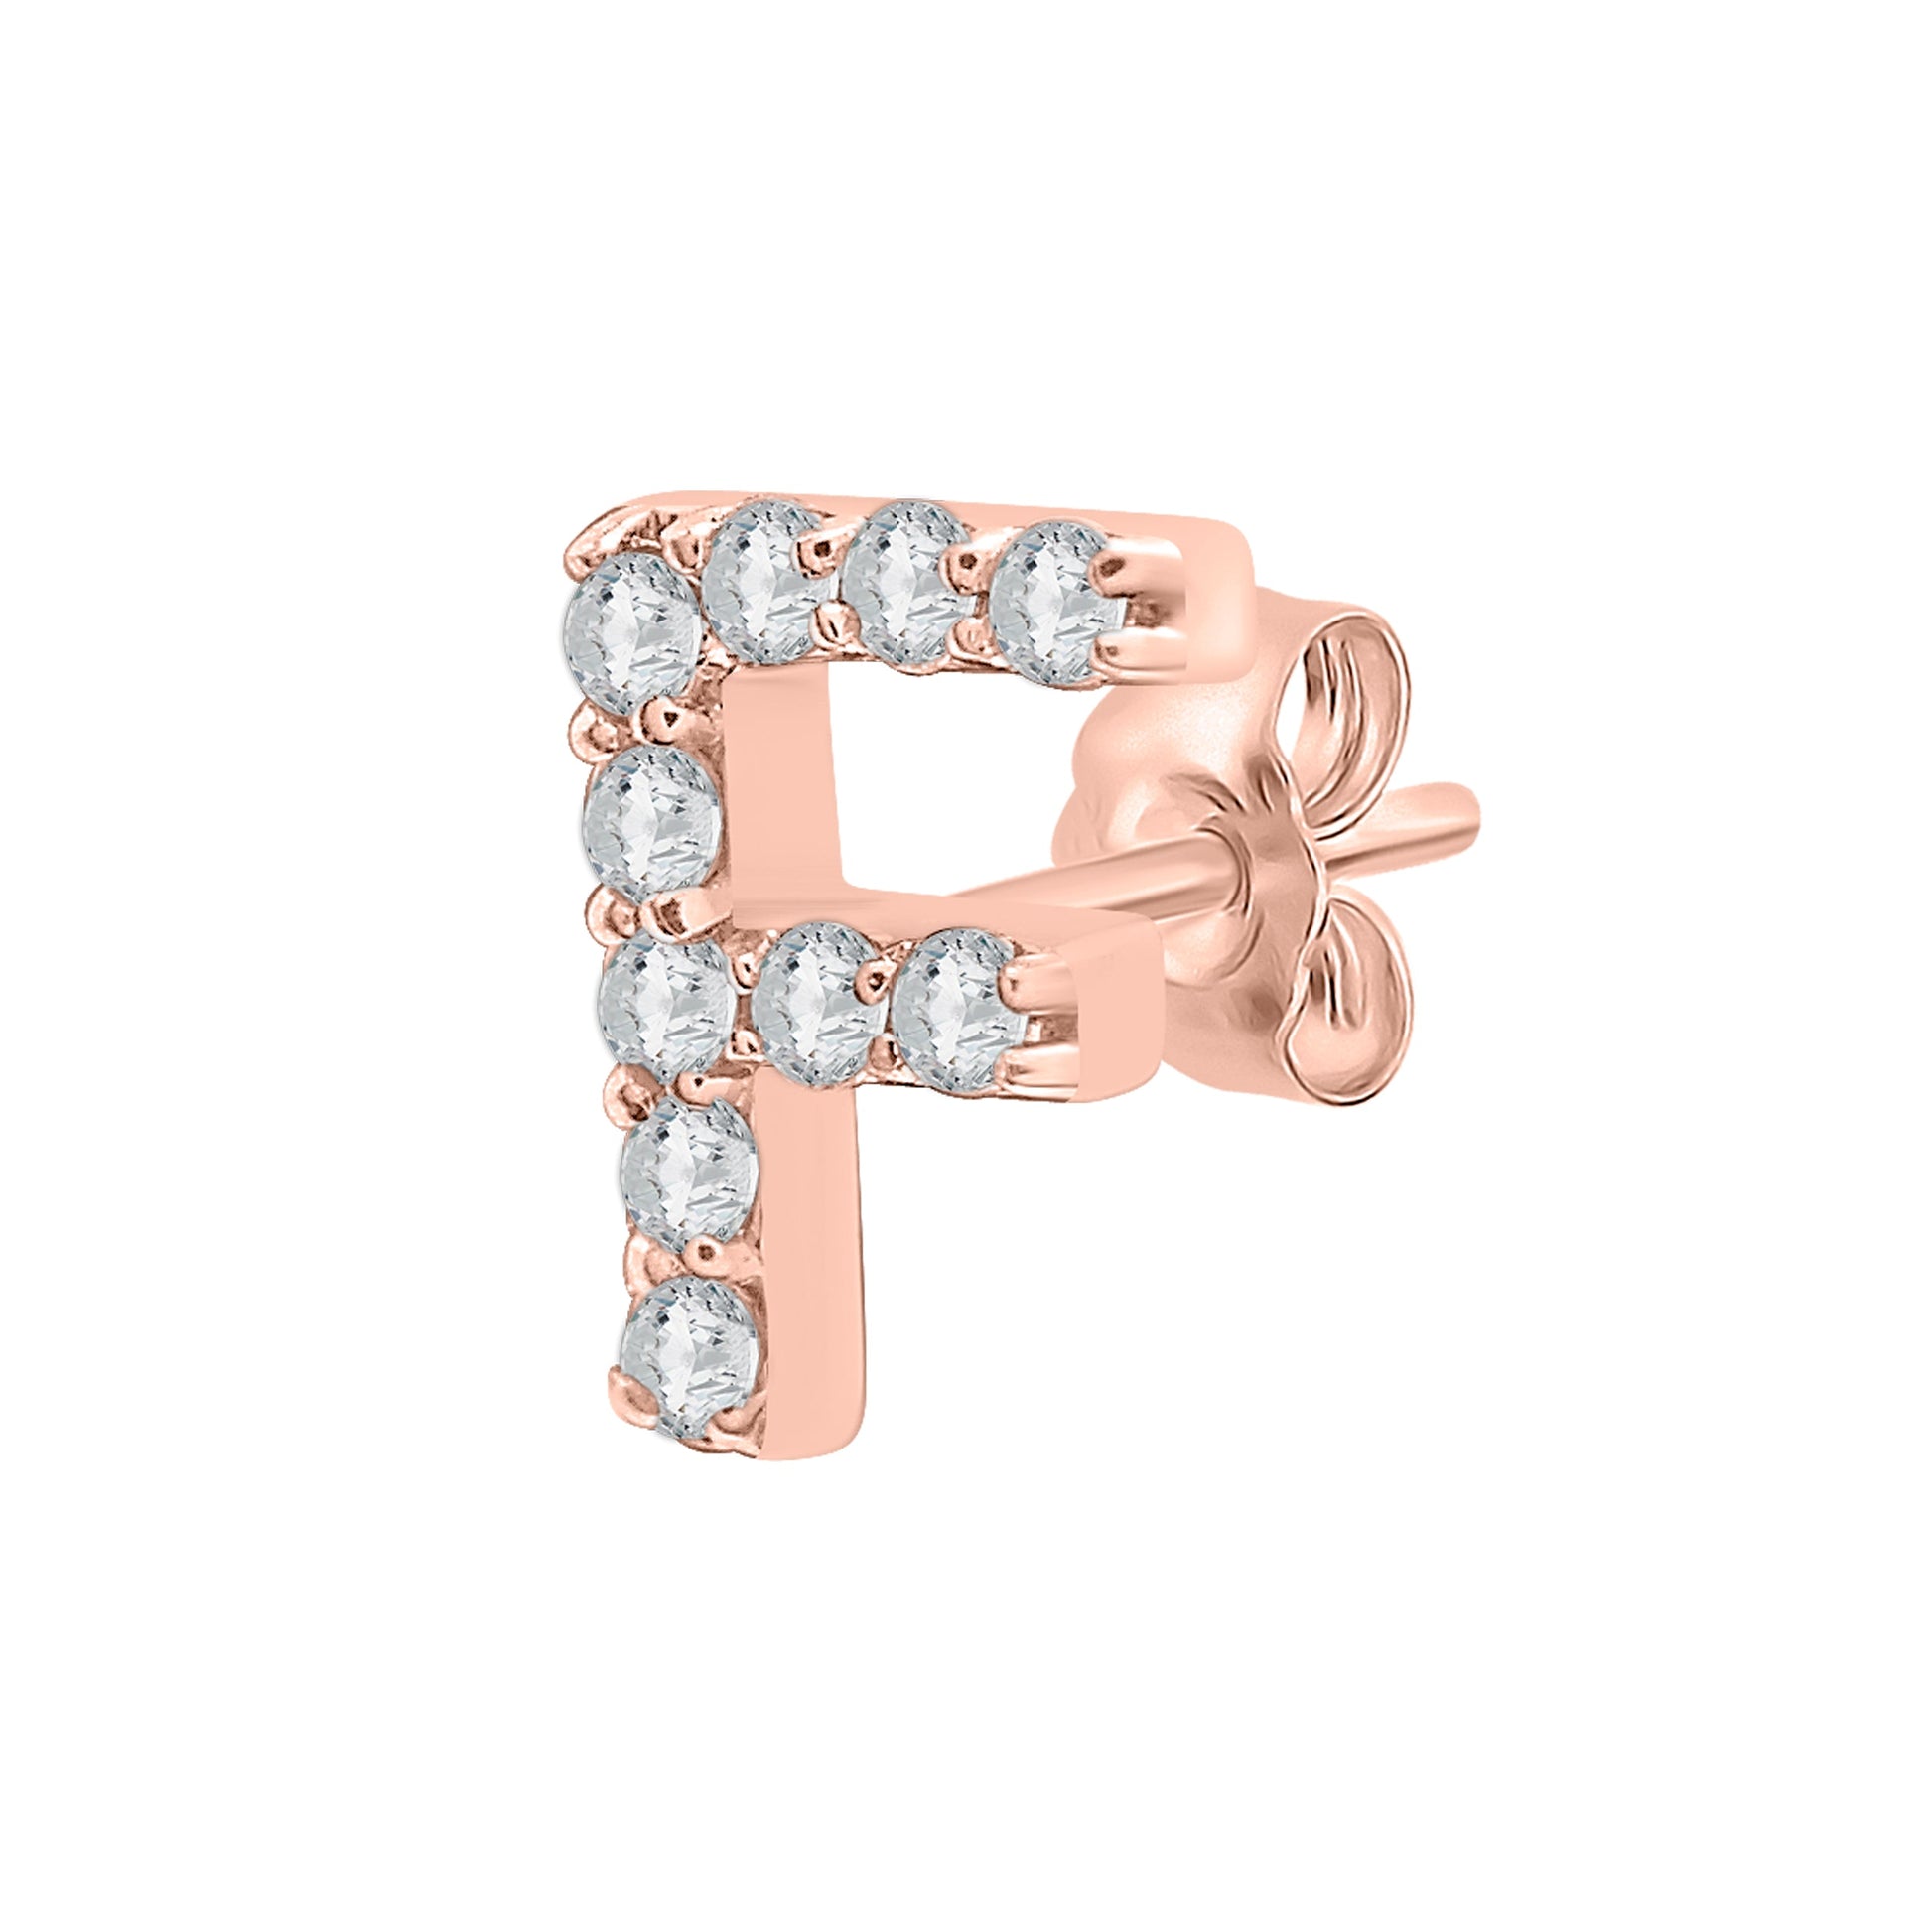 Single Initial Diamond Stud - F in Rose Gold for Ear